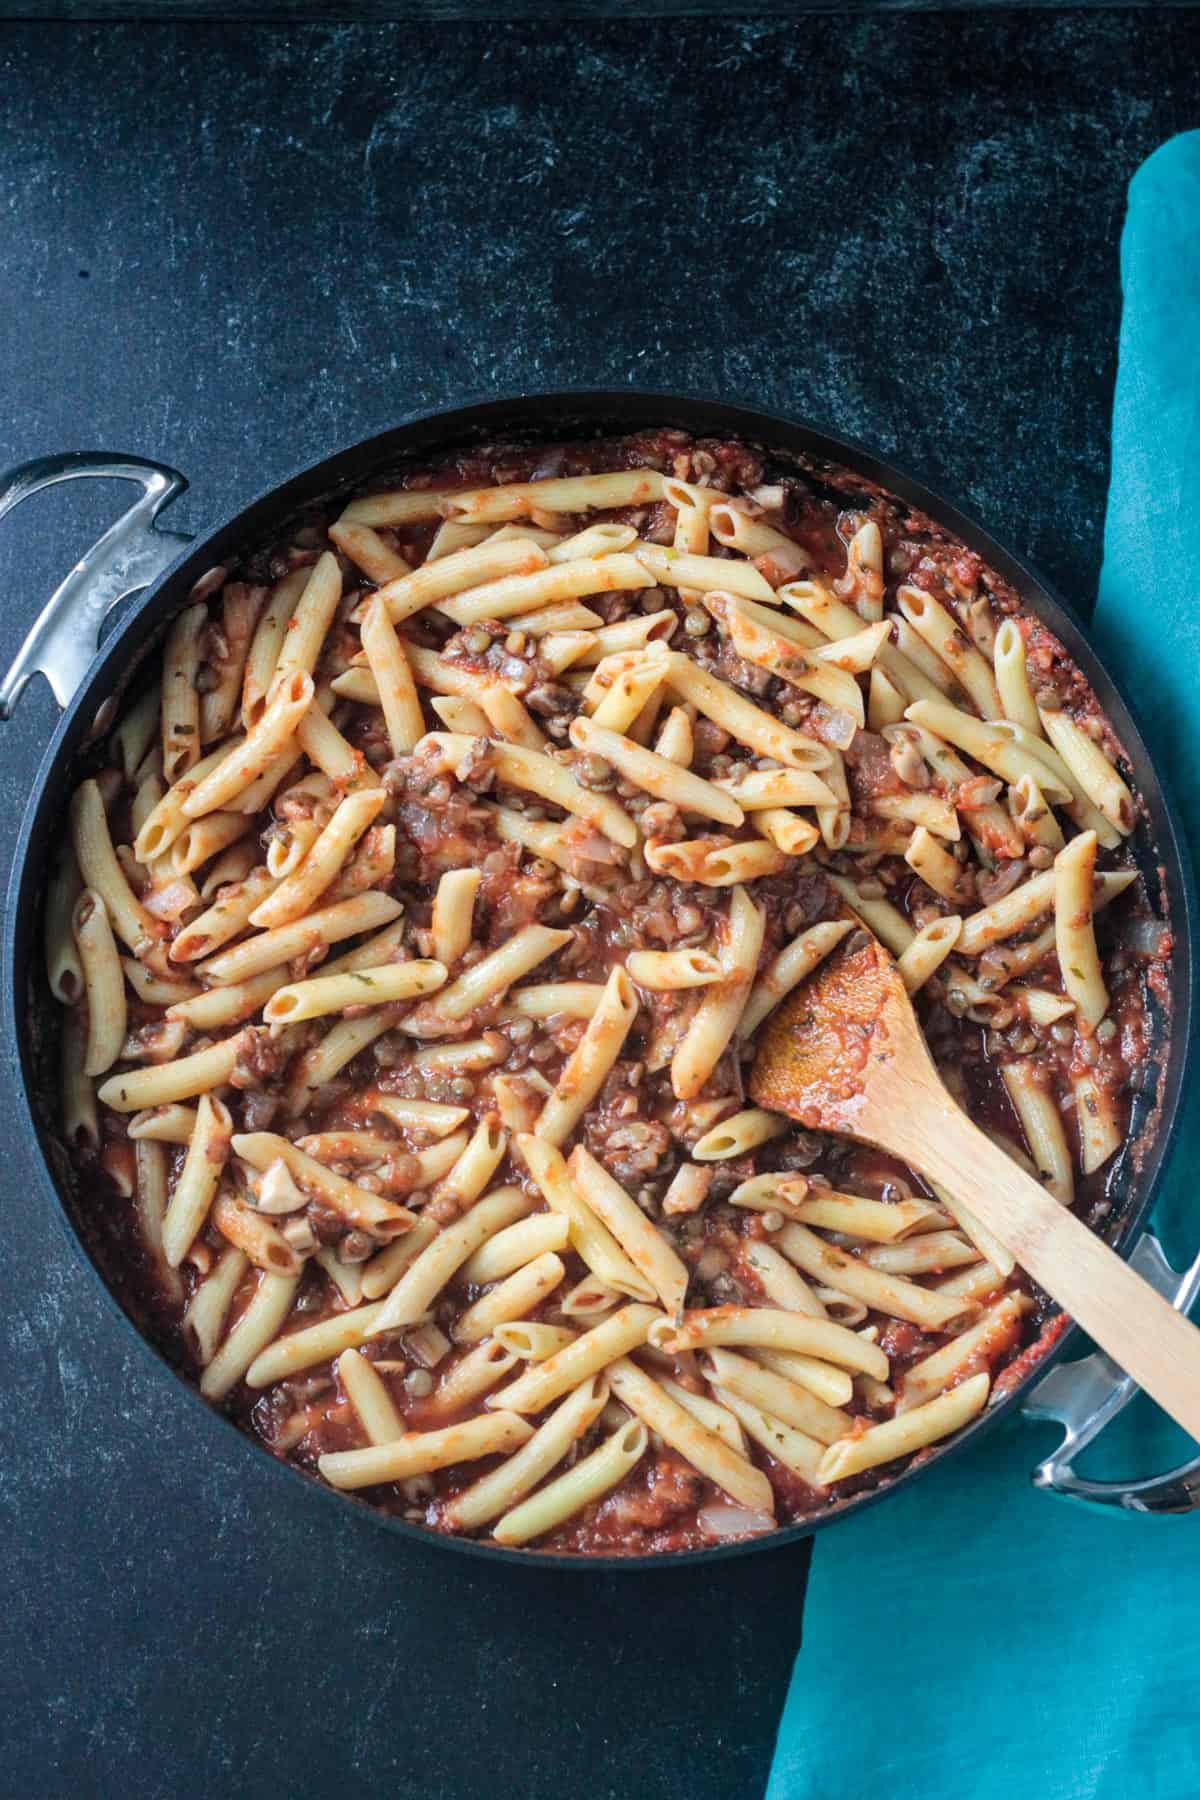 Penne noodles mixed in a skillet full of pasta sauce.